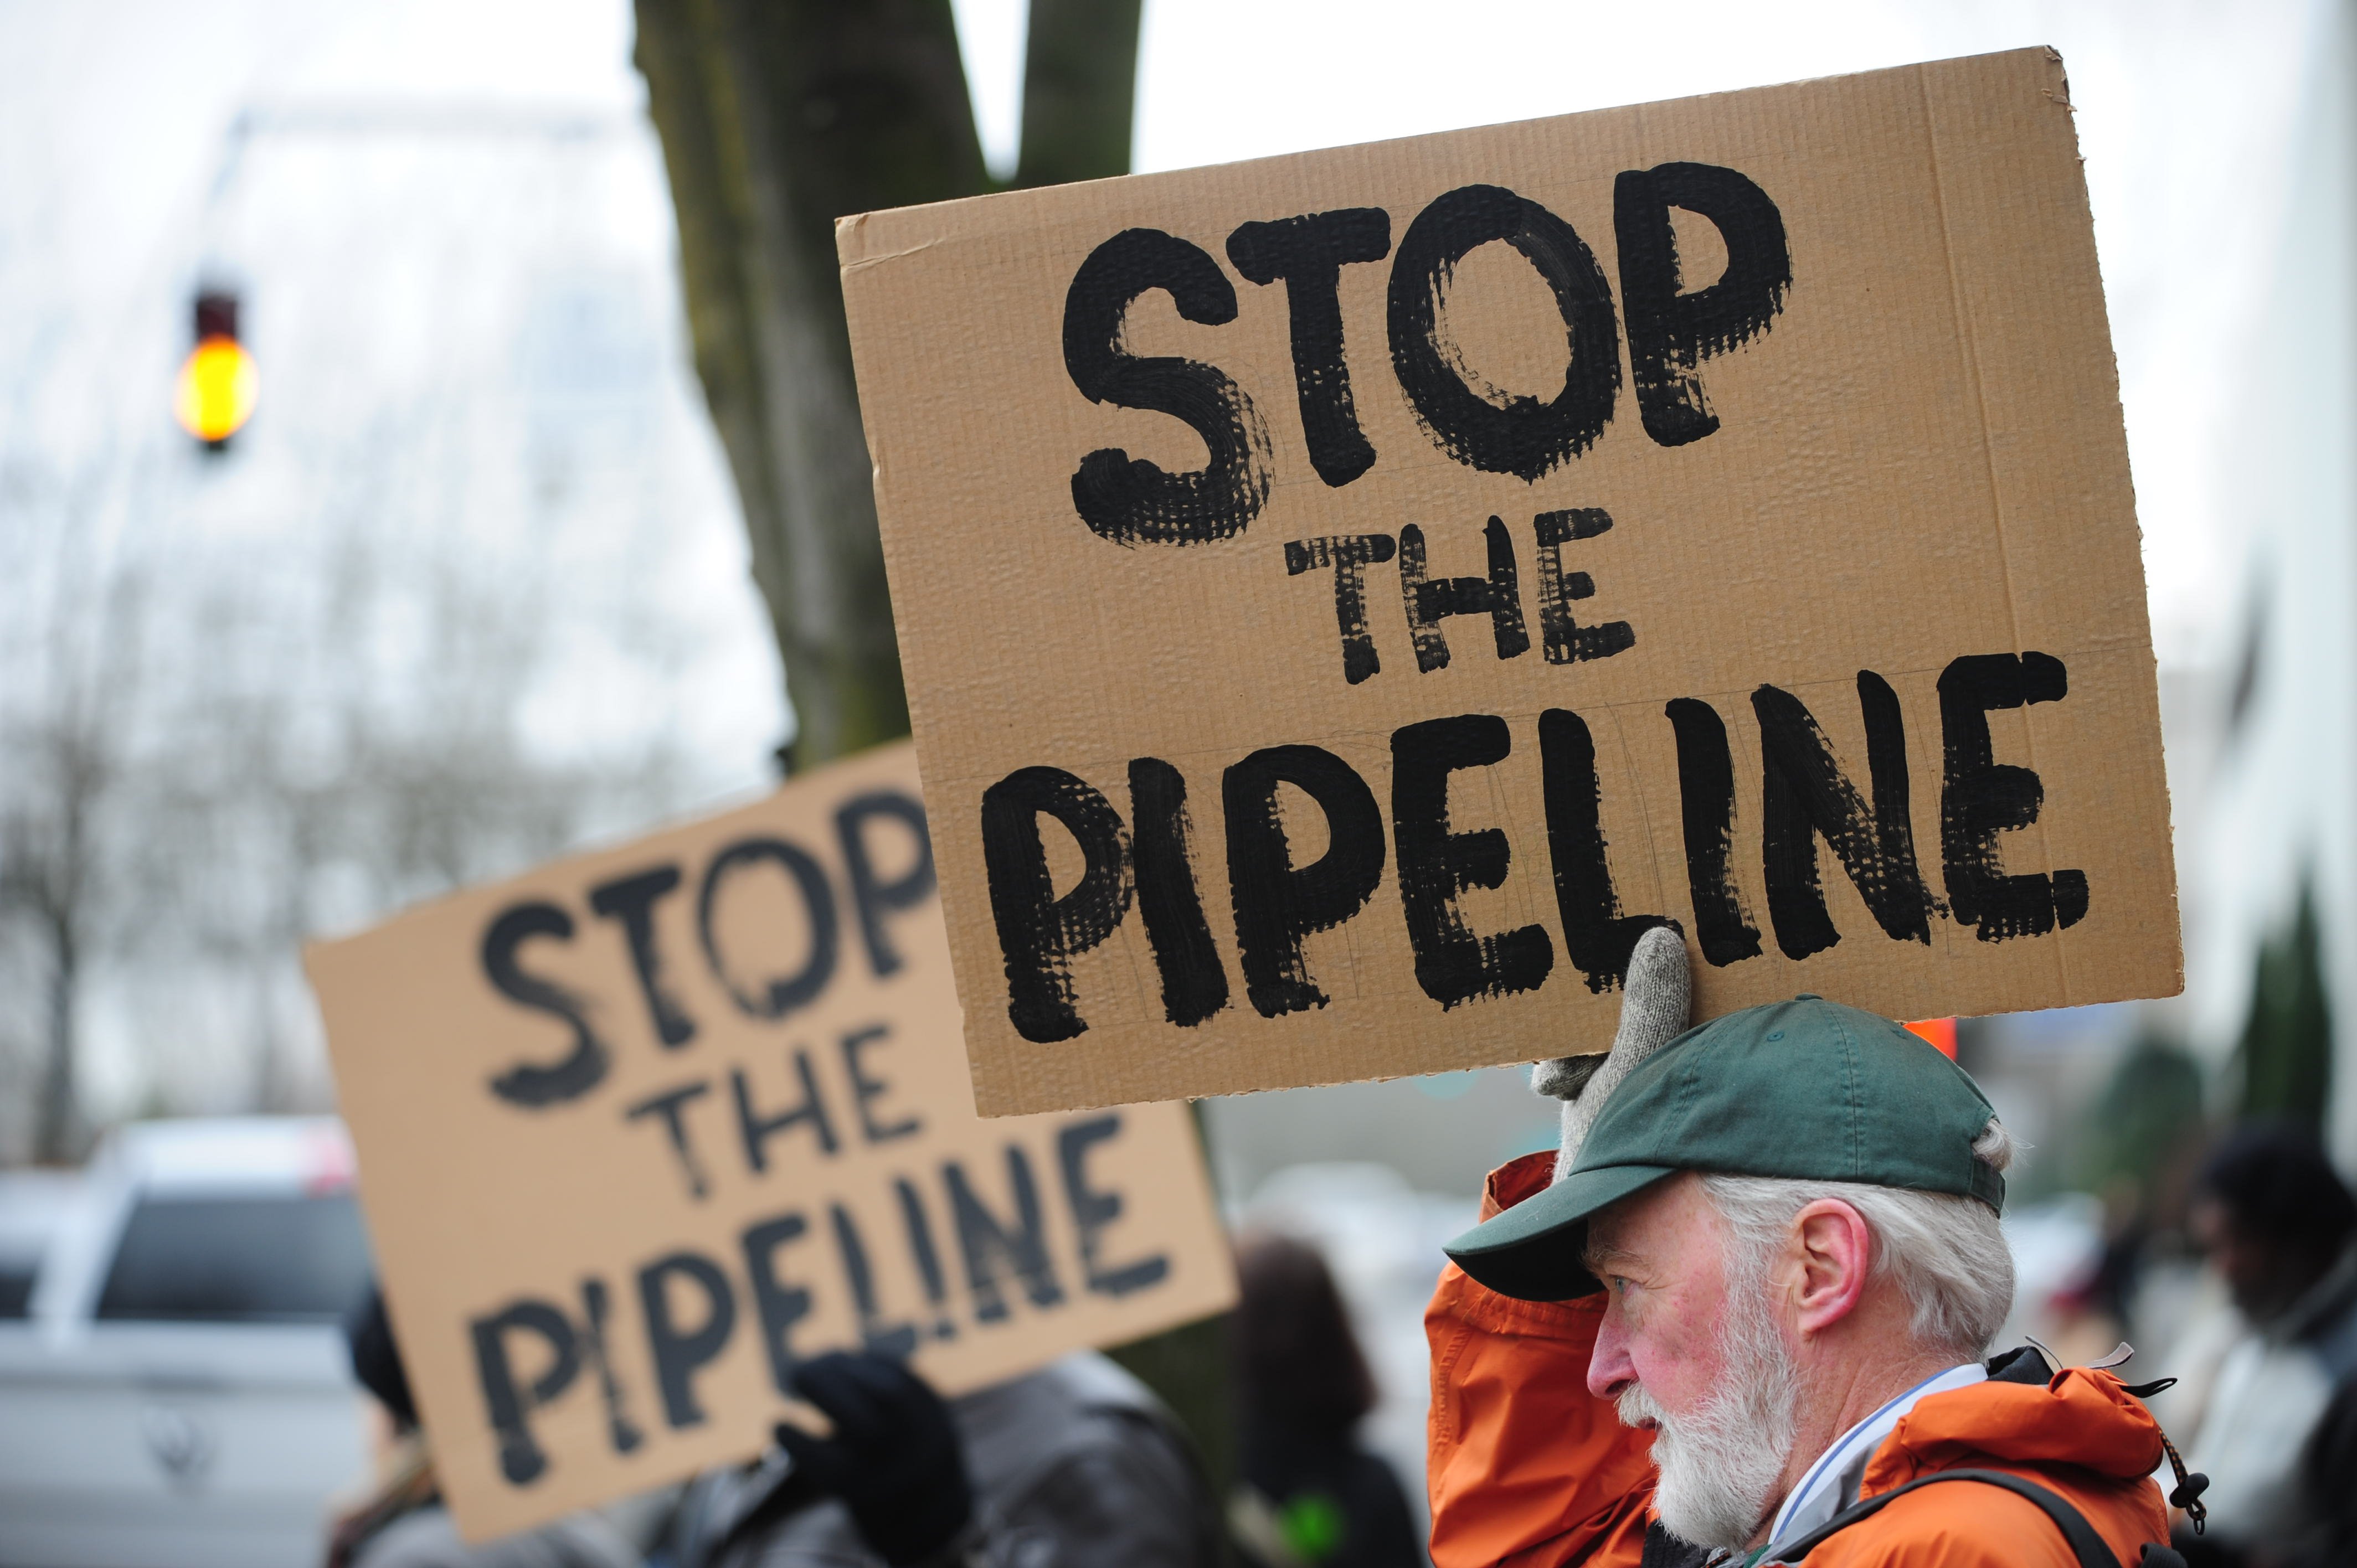 Protesters demonstrate against TransCanada in Portland on the opening day of the southern leg of the Keystone Pipeline, on Jan. 22, 2014. (Alex Milan Tracy—Demotix/Corbis)